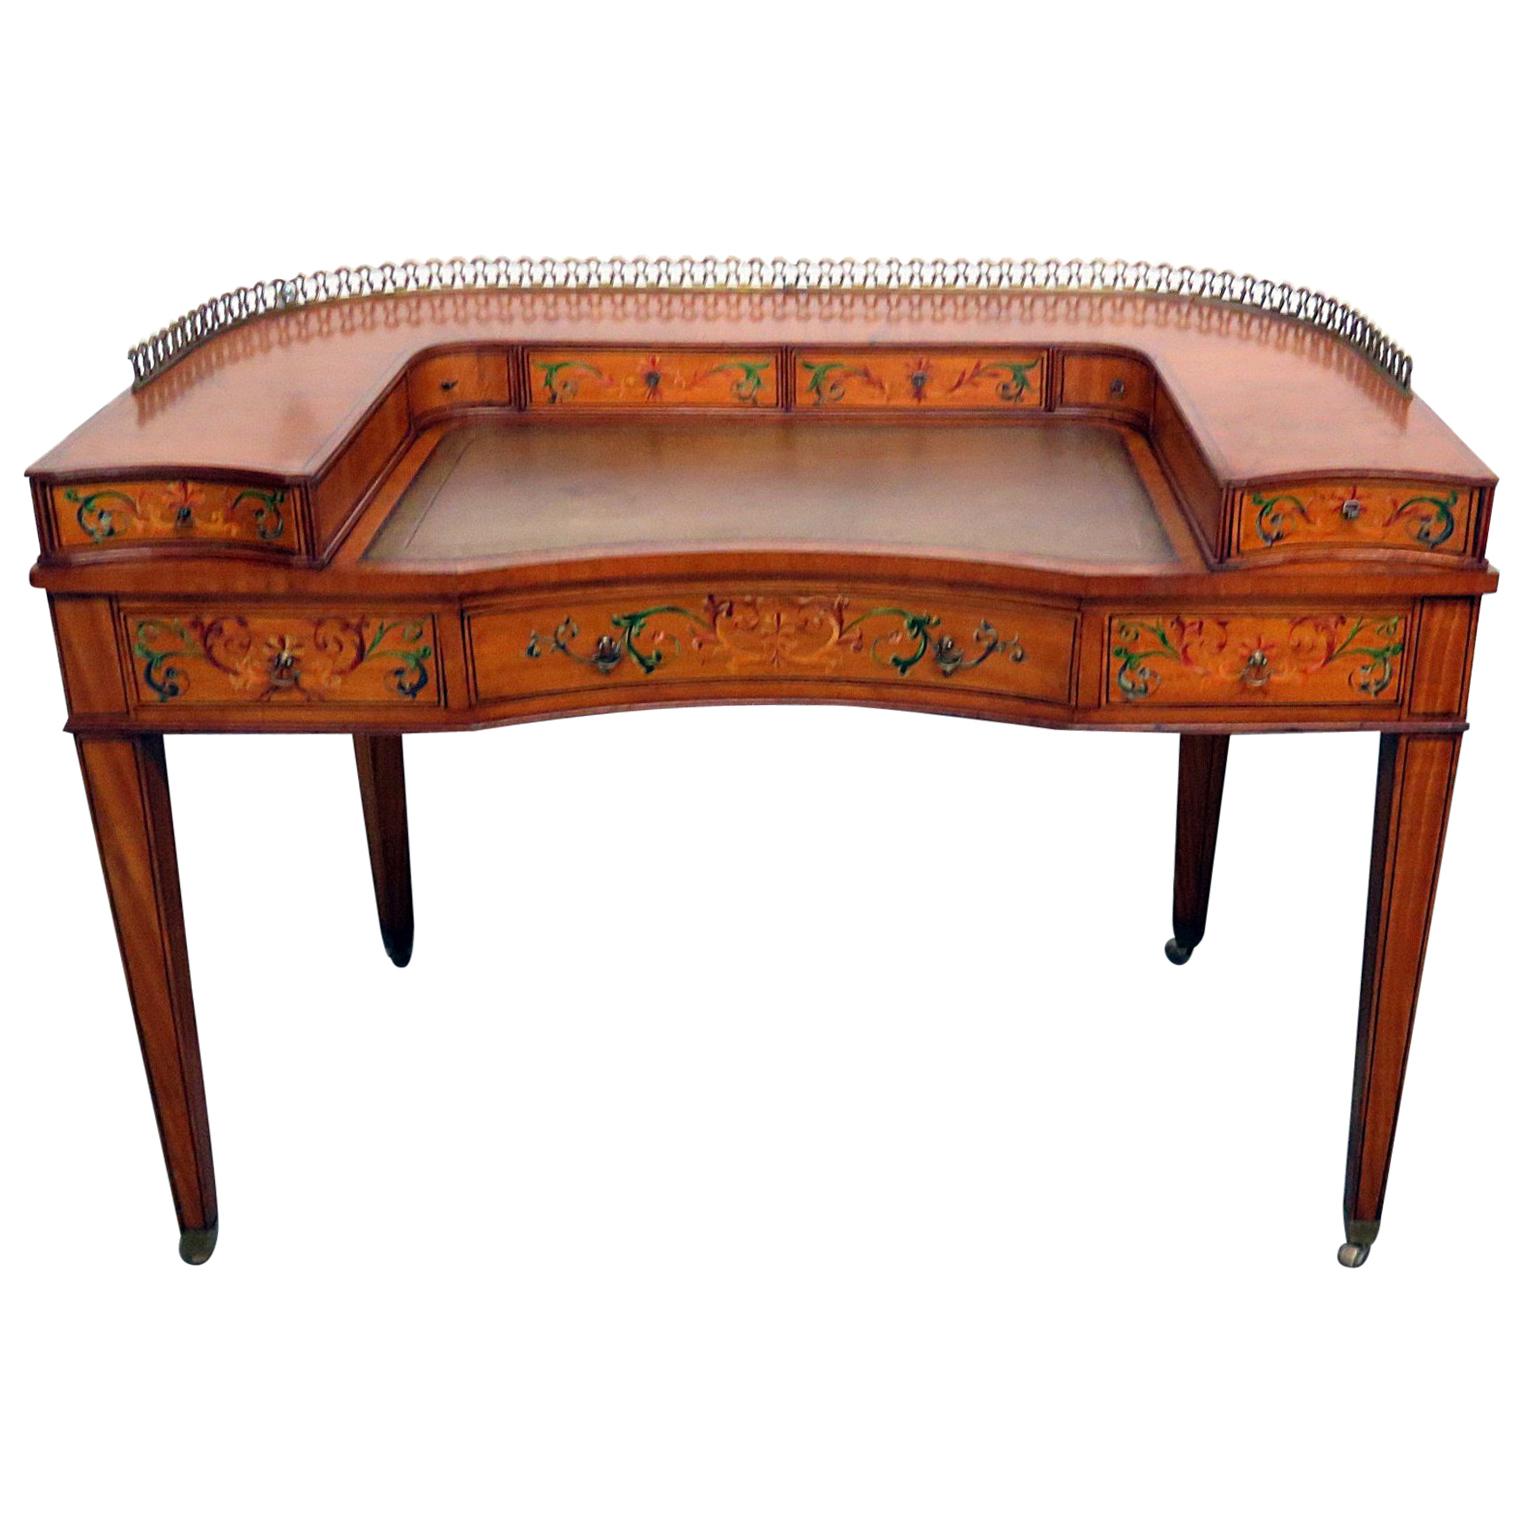 English Edwardian Paint Decorated Adams Leather Top Writing Table Desk C1930